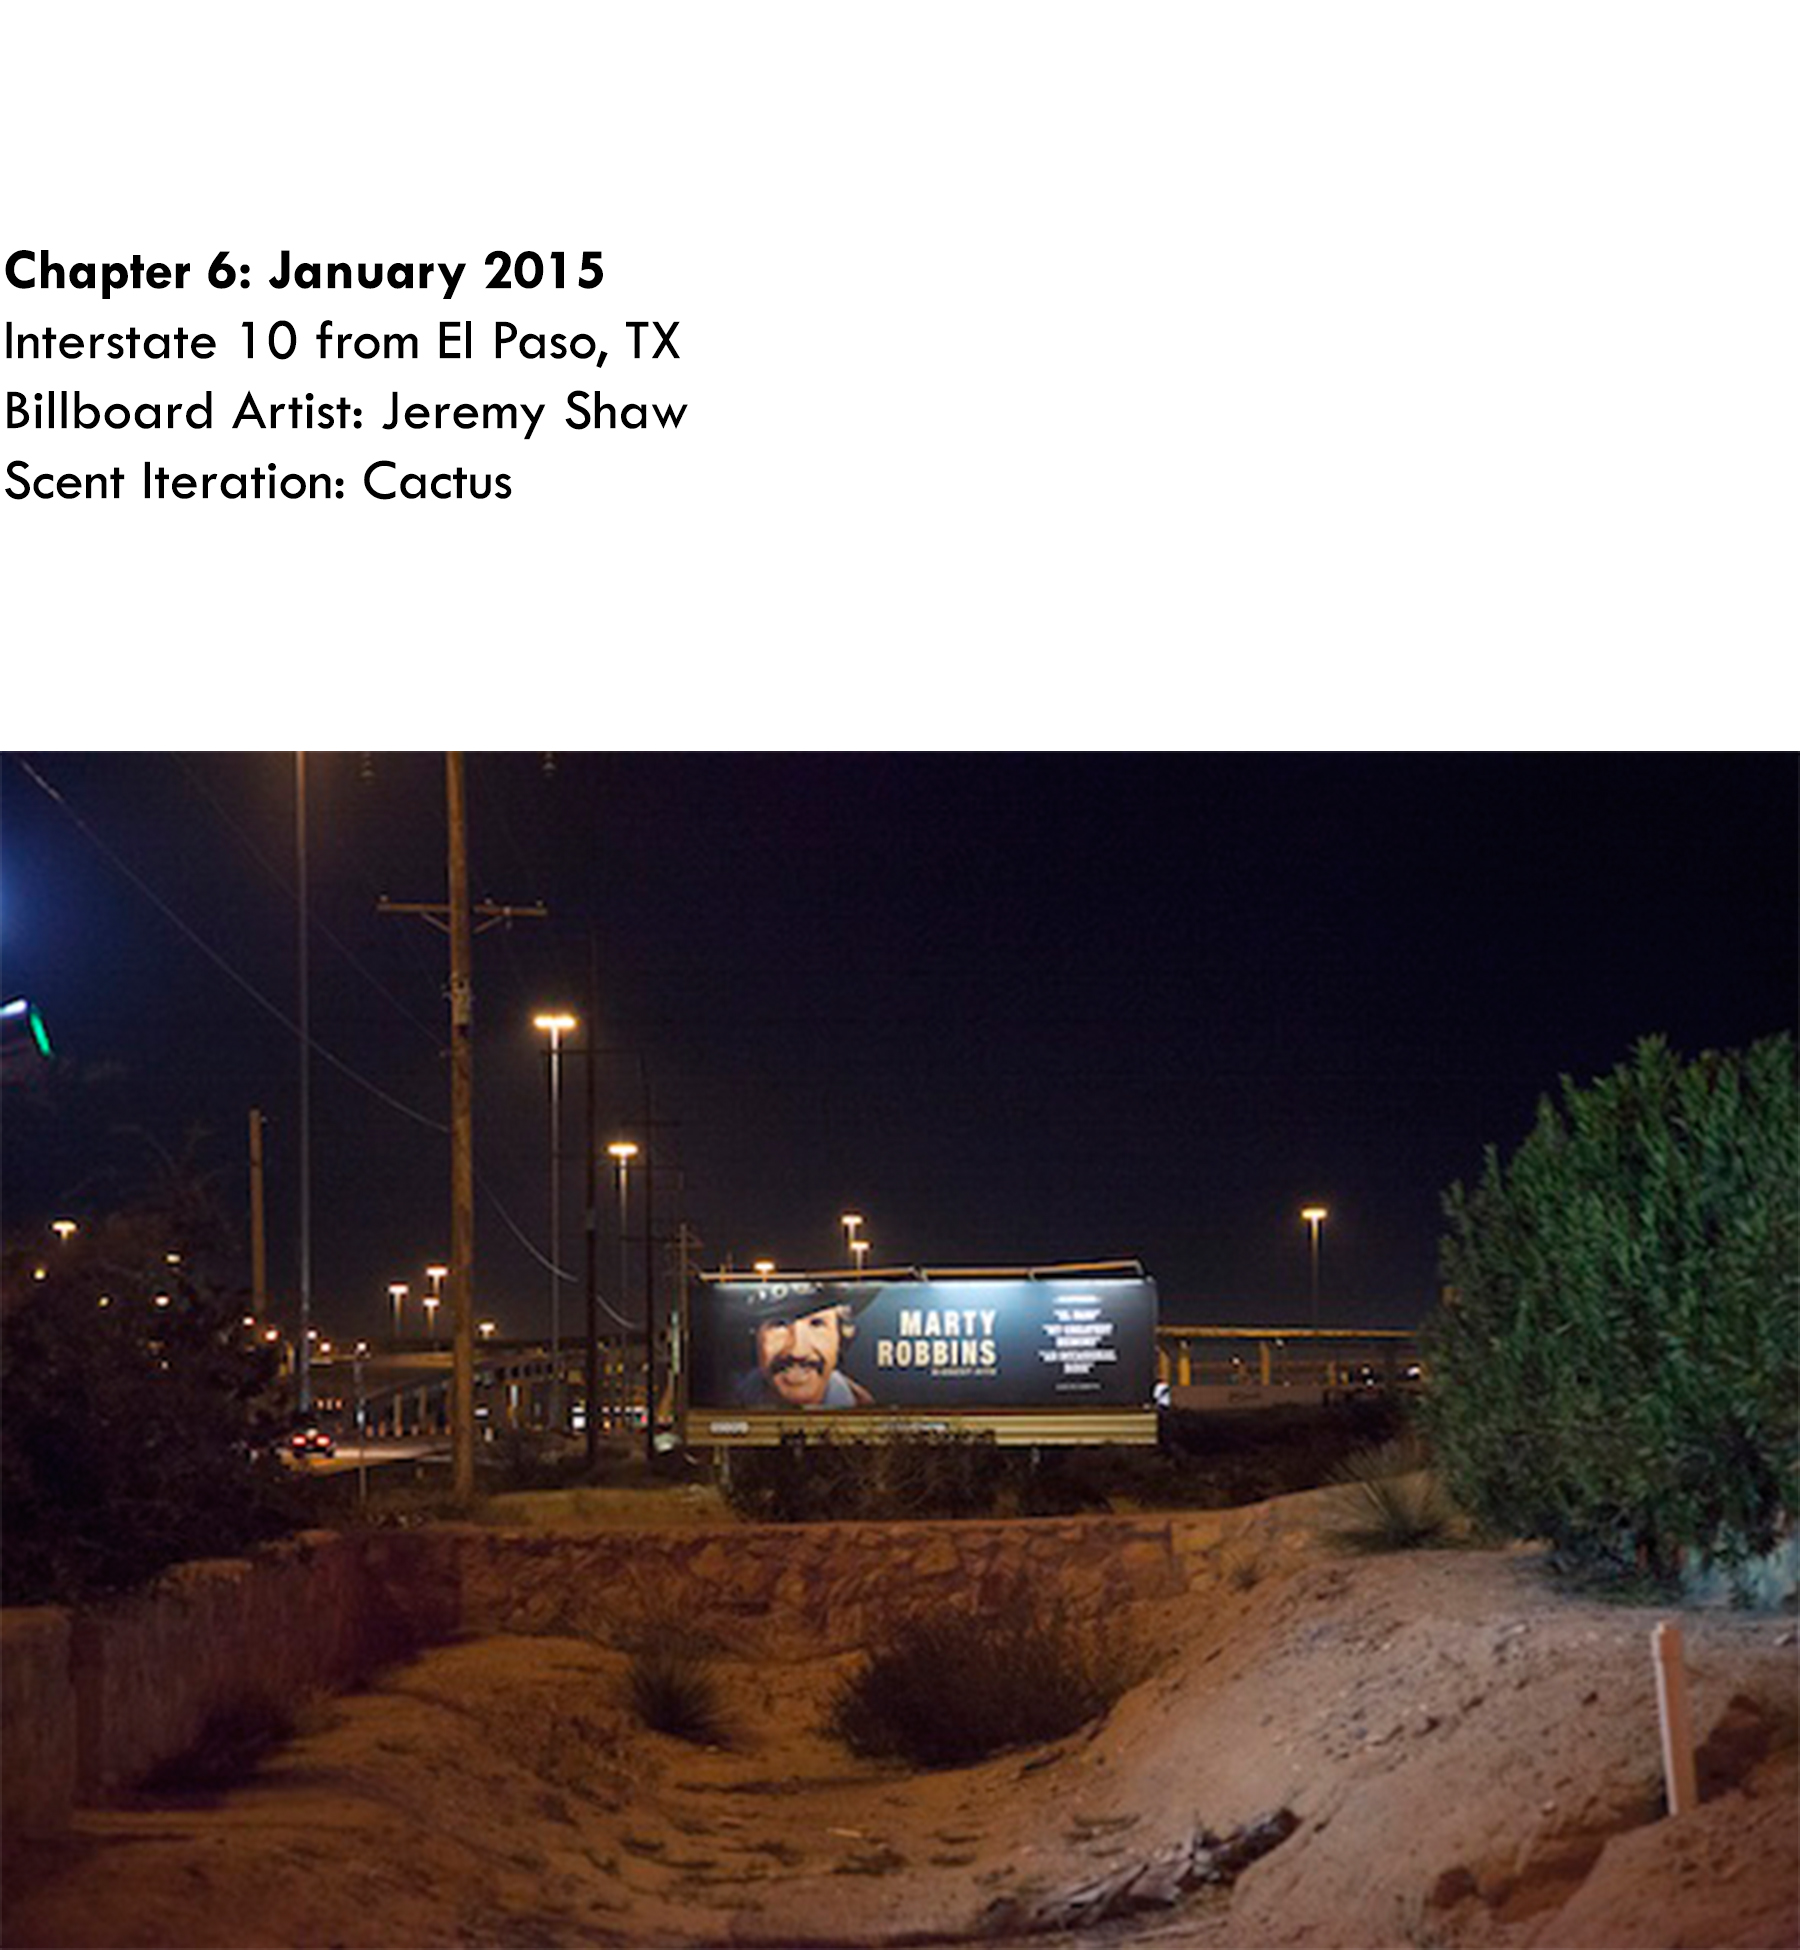 Chapter 6: January 2015, Jeremy Shaw, Interstate 10 from El Paso, TX, Scent Iteration: Cactus